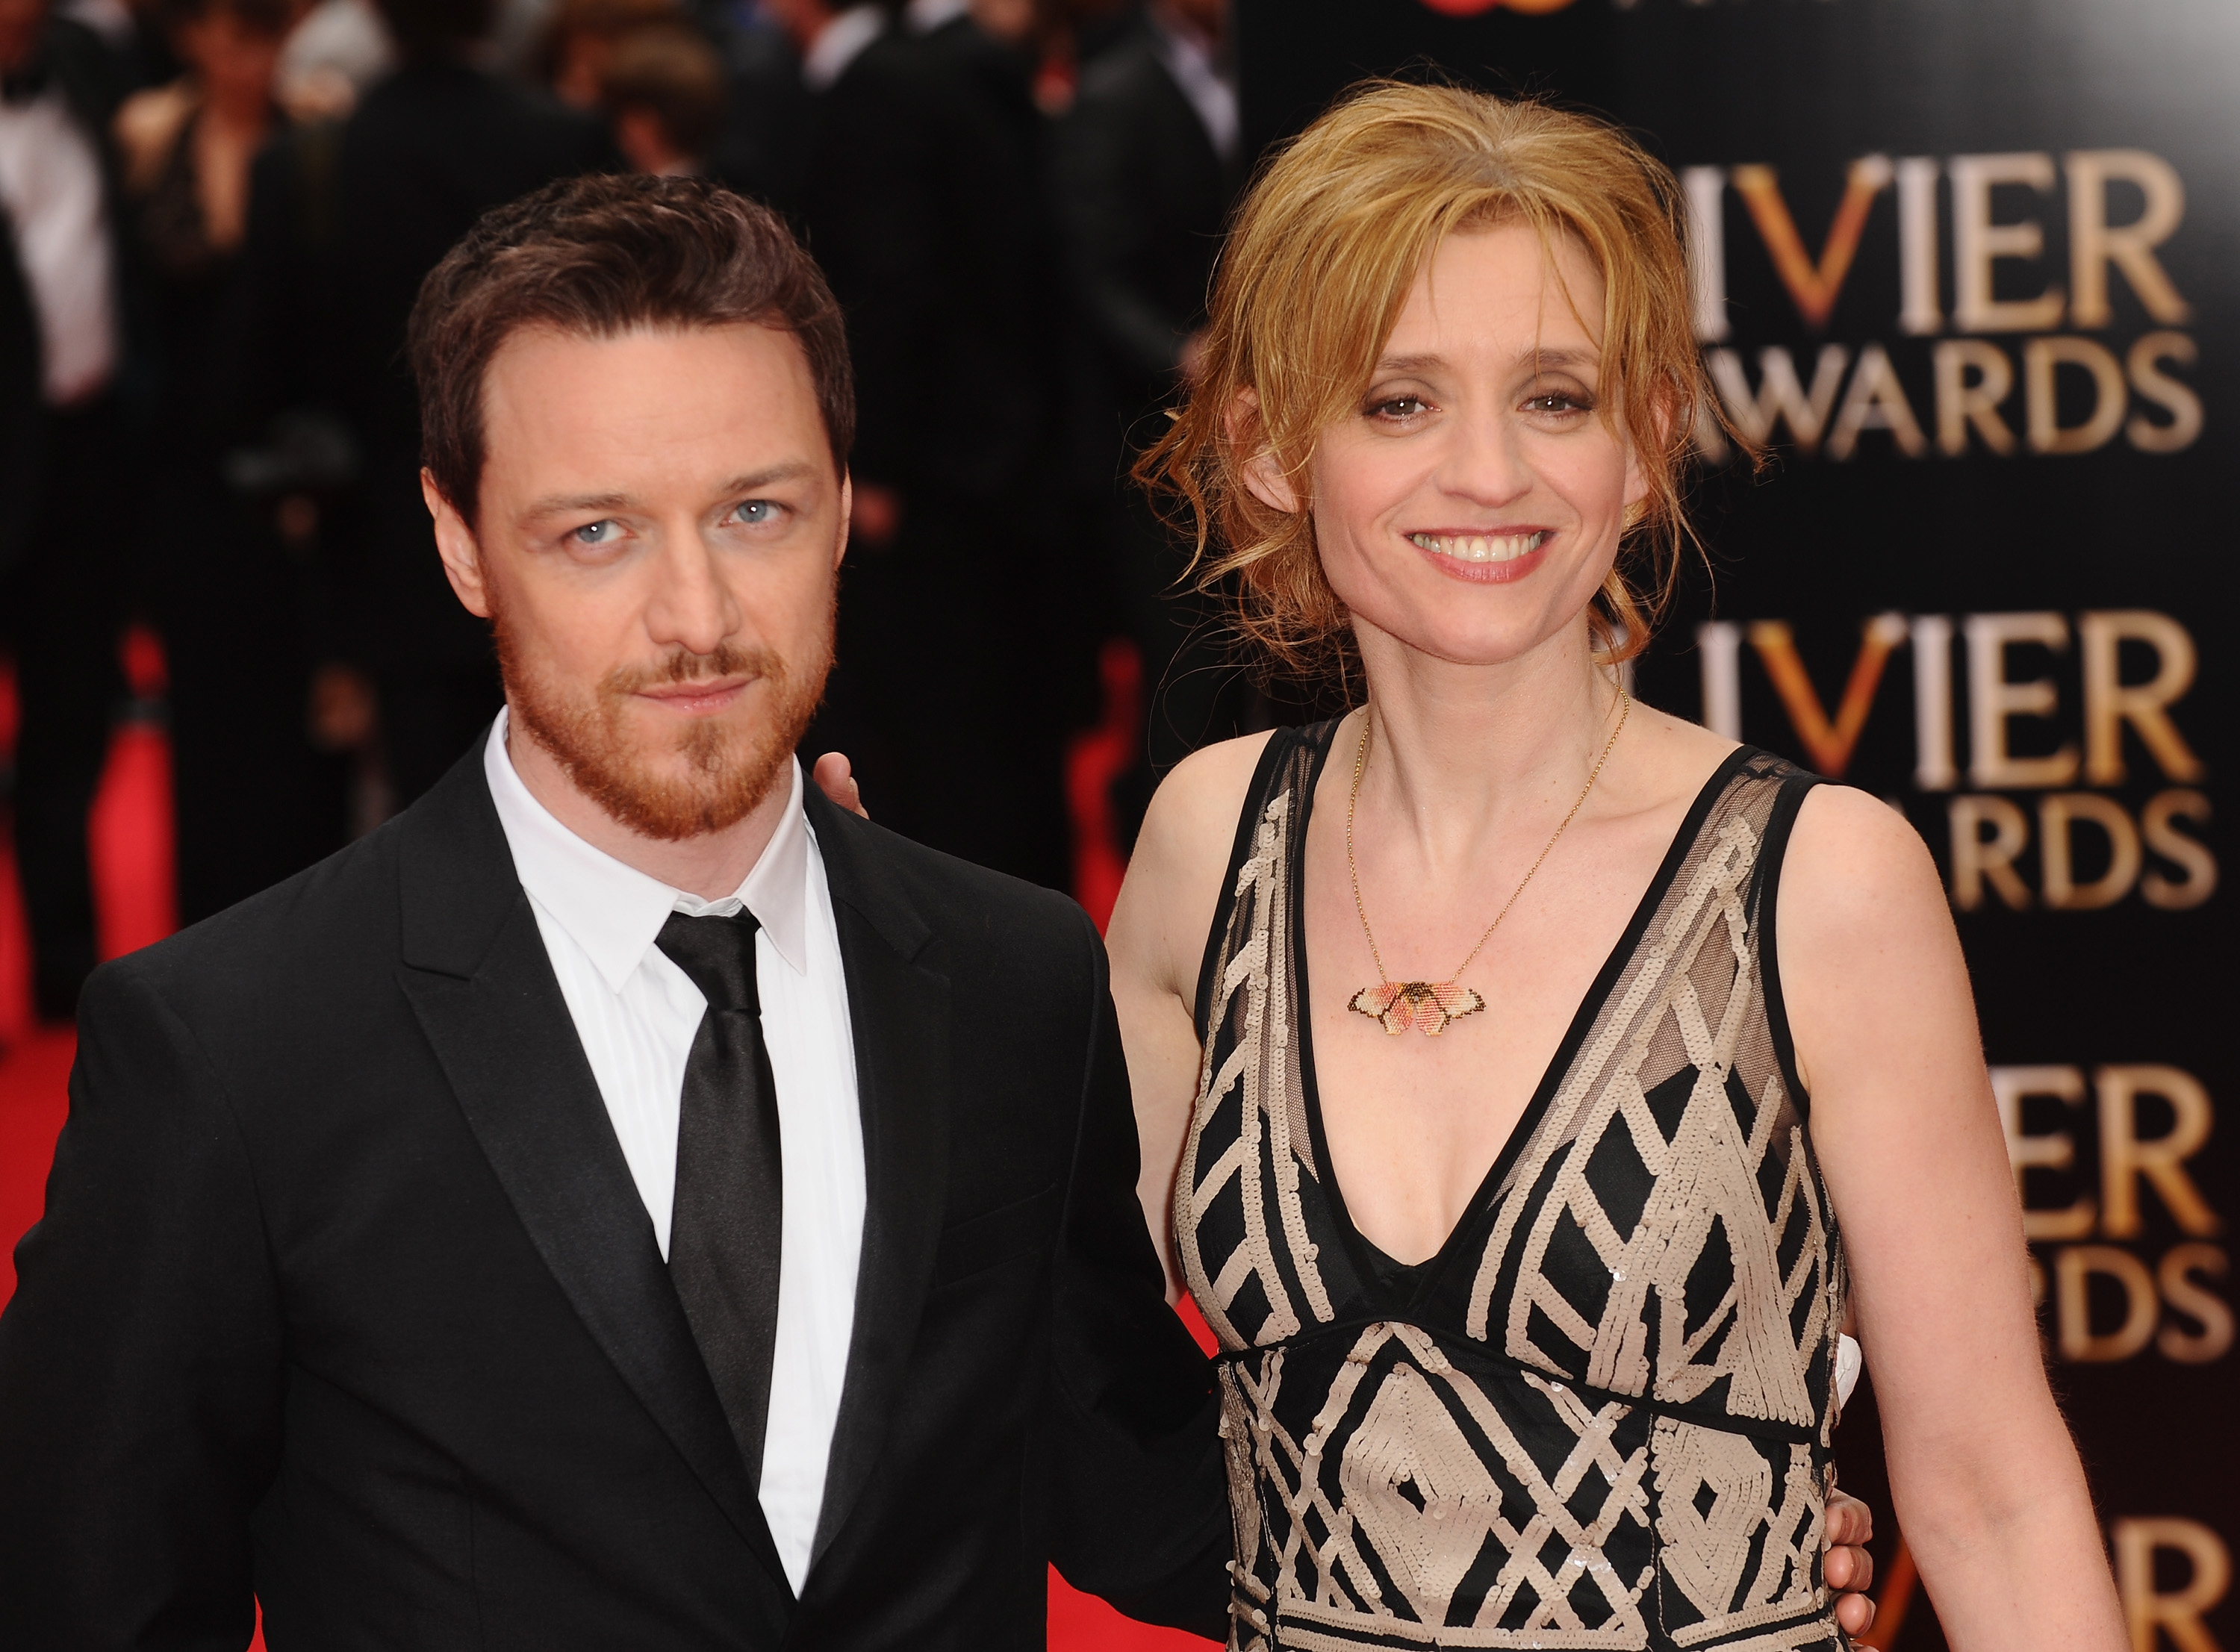 James McAvoy and Anne-Marie Duff attend The Laurence Olivier Awards at The Royal Opera House on April 28, 2013, in London, England. | Source: Getty Images